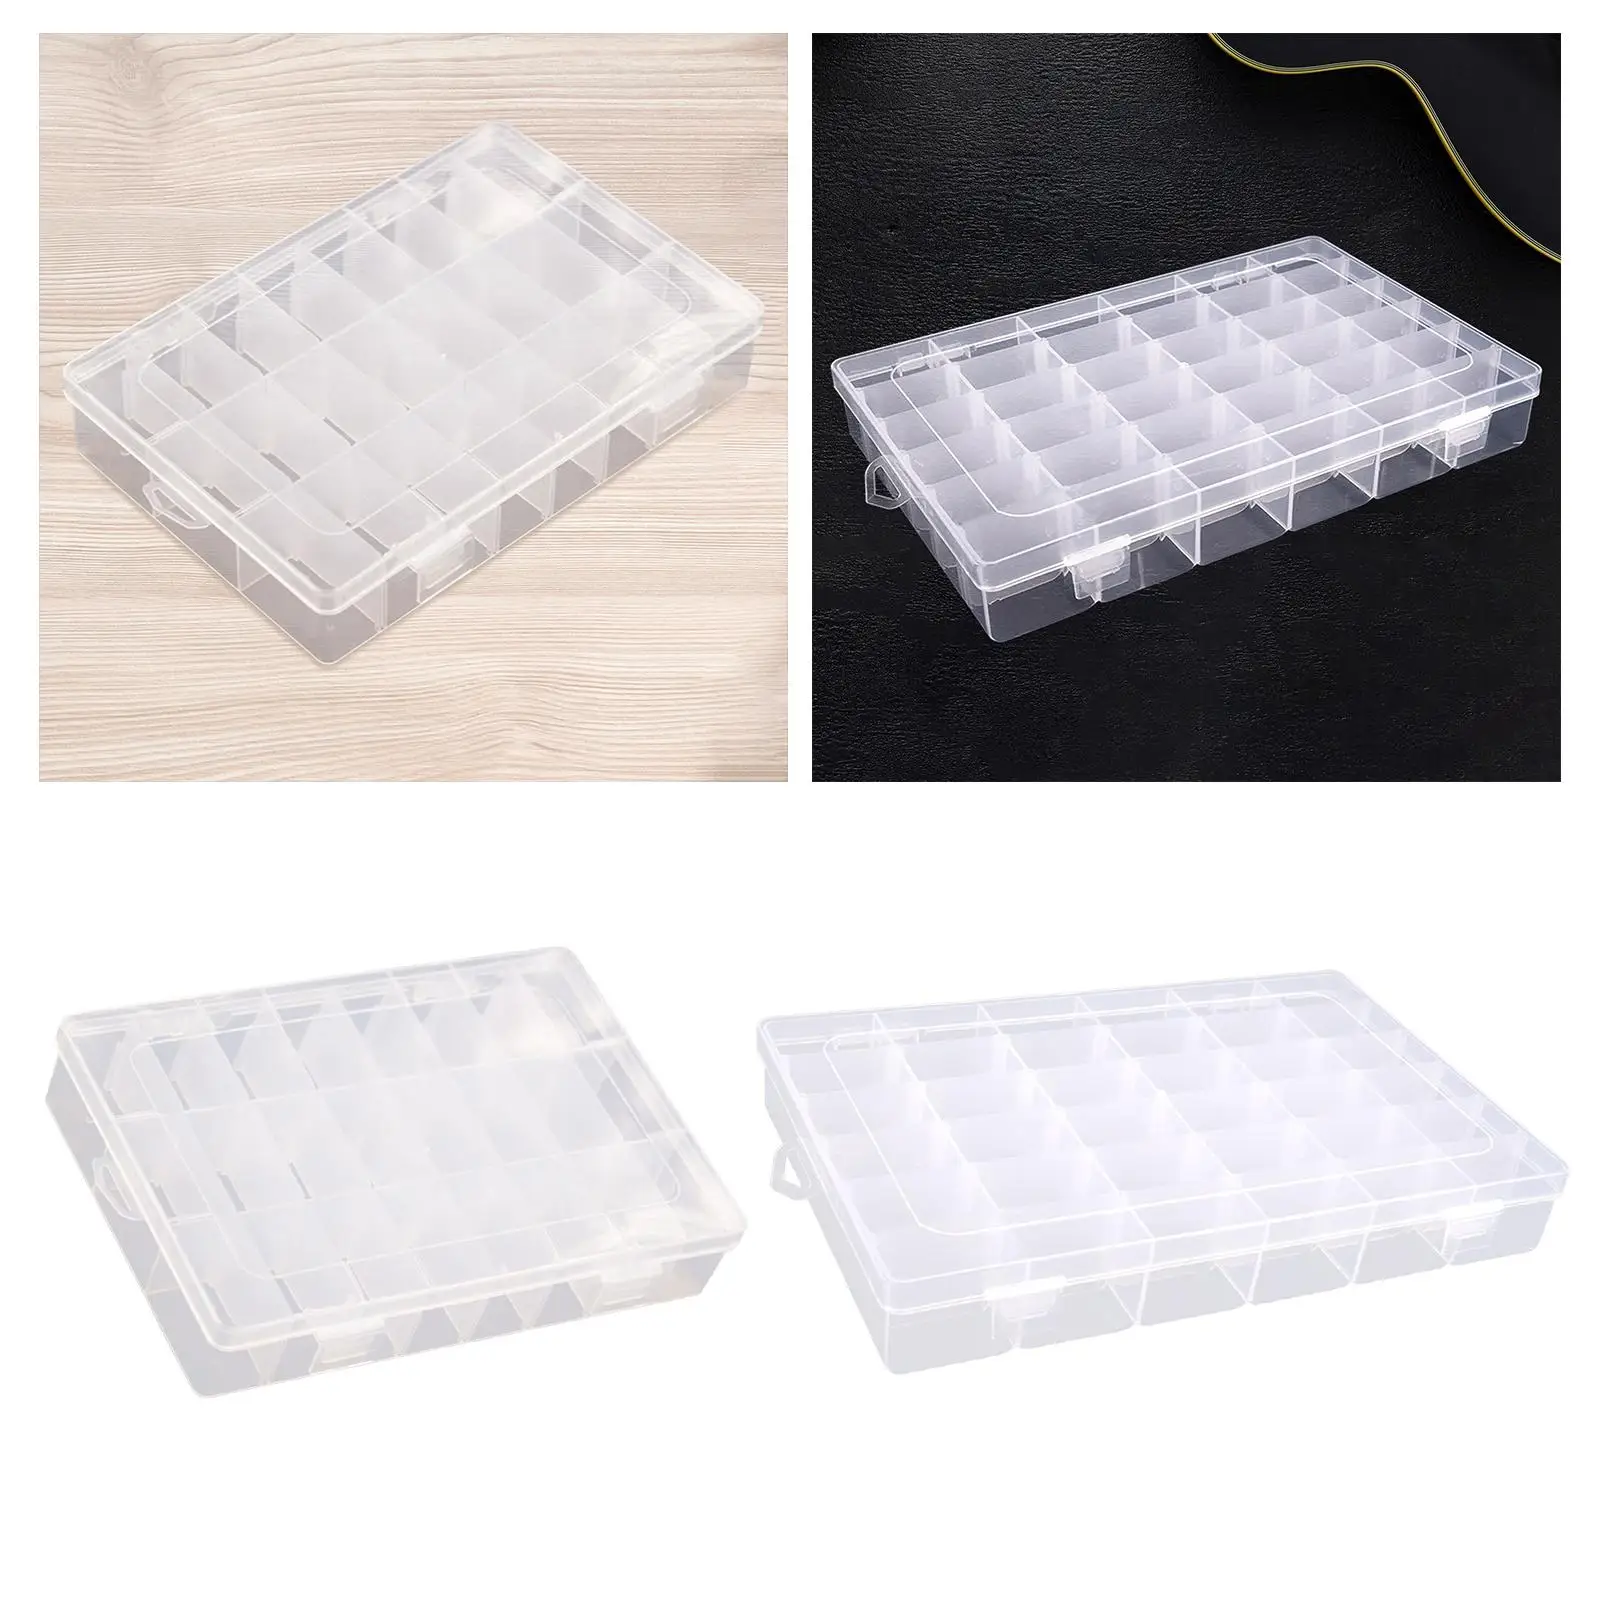 Sewing Thread Storage Box Grids Container Nail Polish Sewing Thread Holder